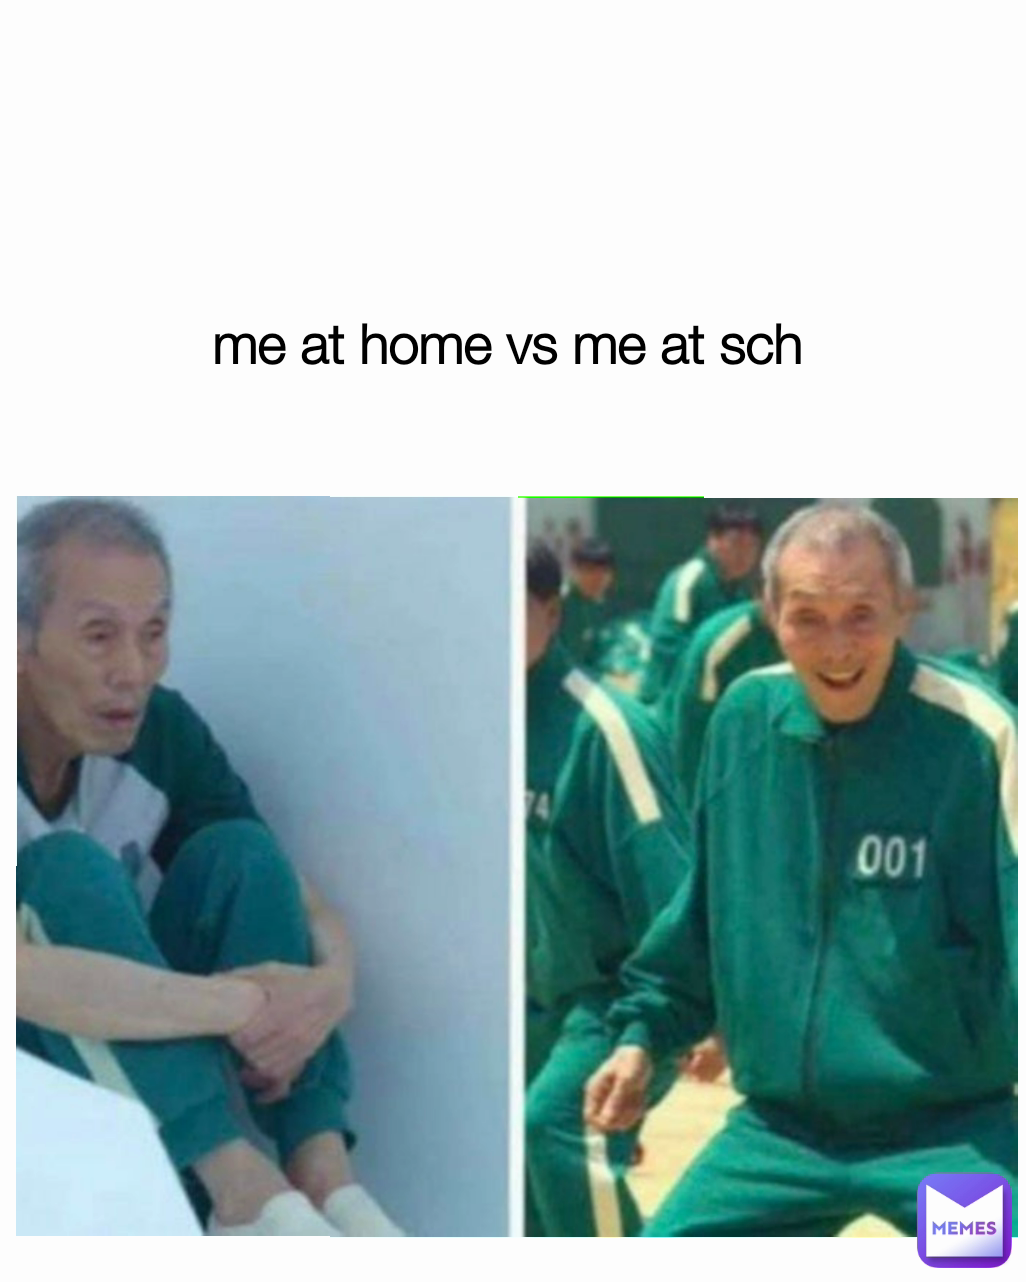 me at home vs me at sch